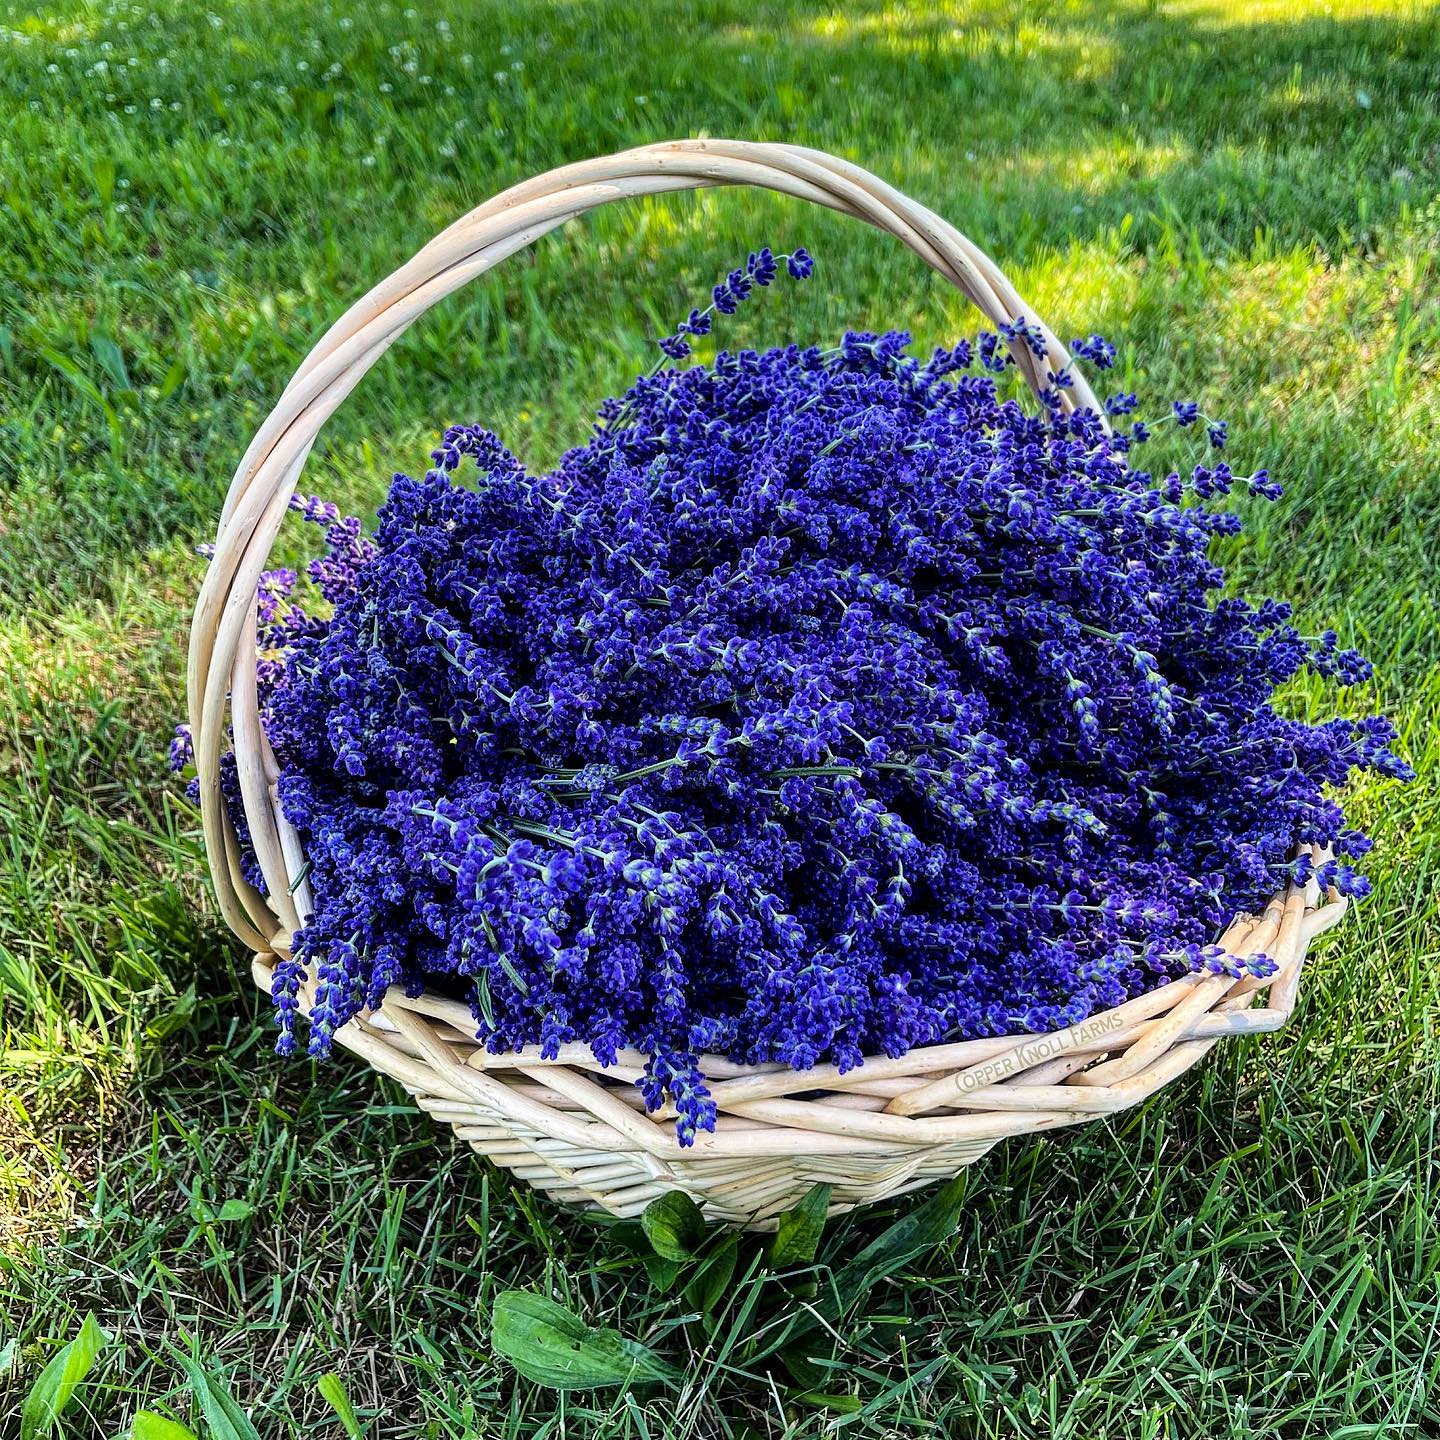 5 Fun Facts About Lavender